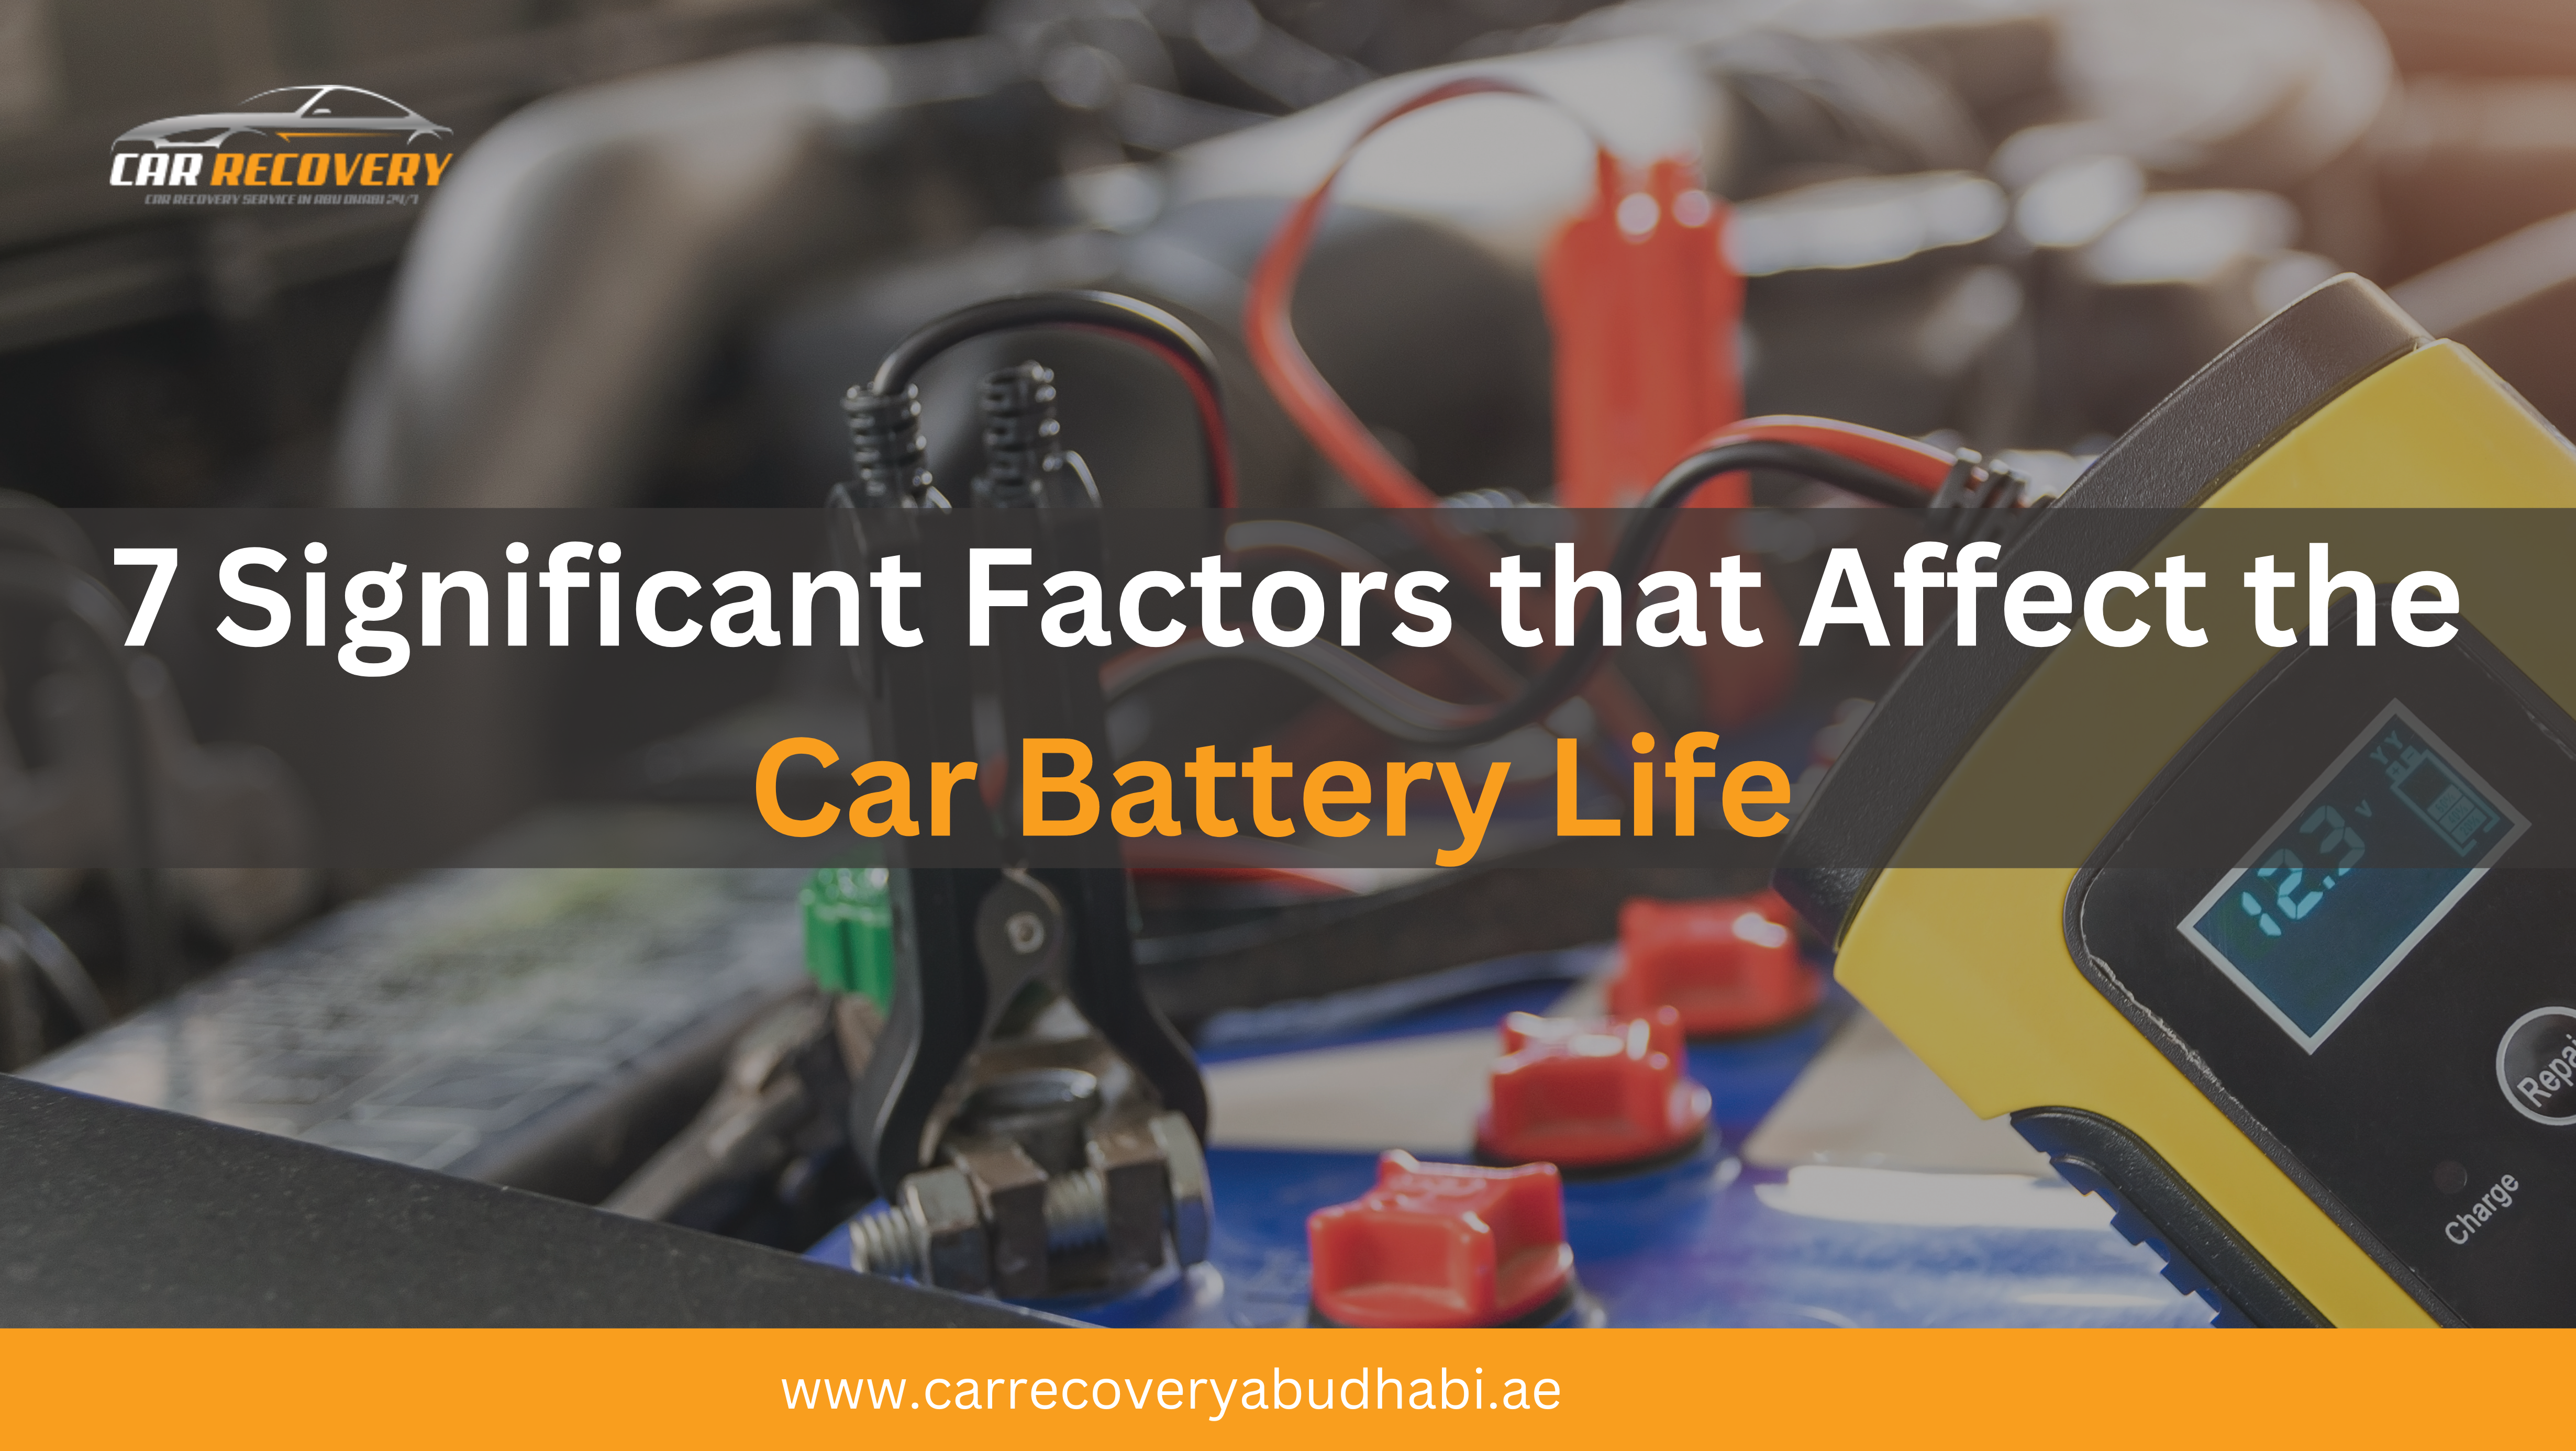 7 Significant Factors that Affect the Car Battery Life